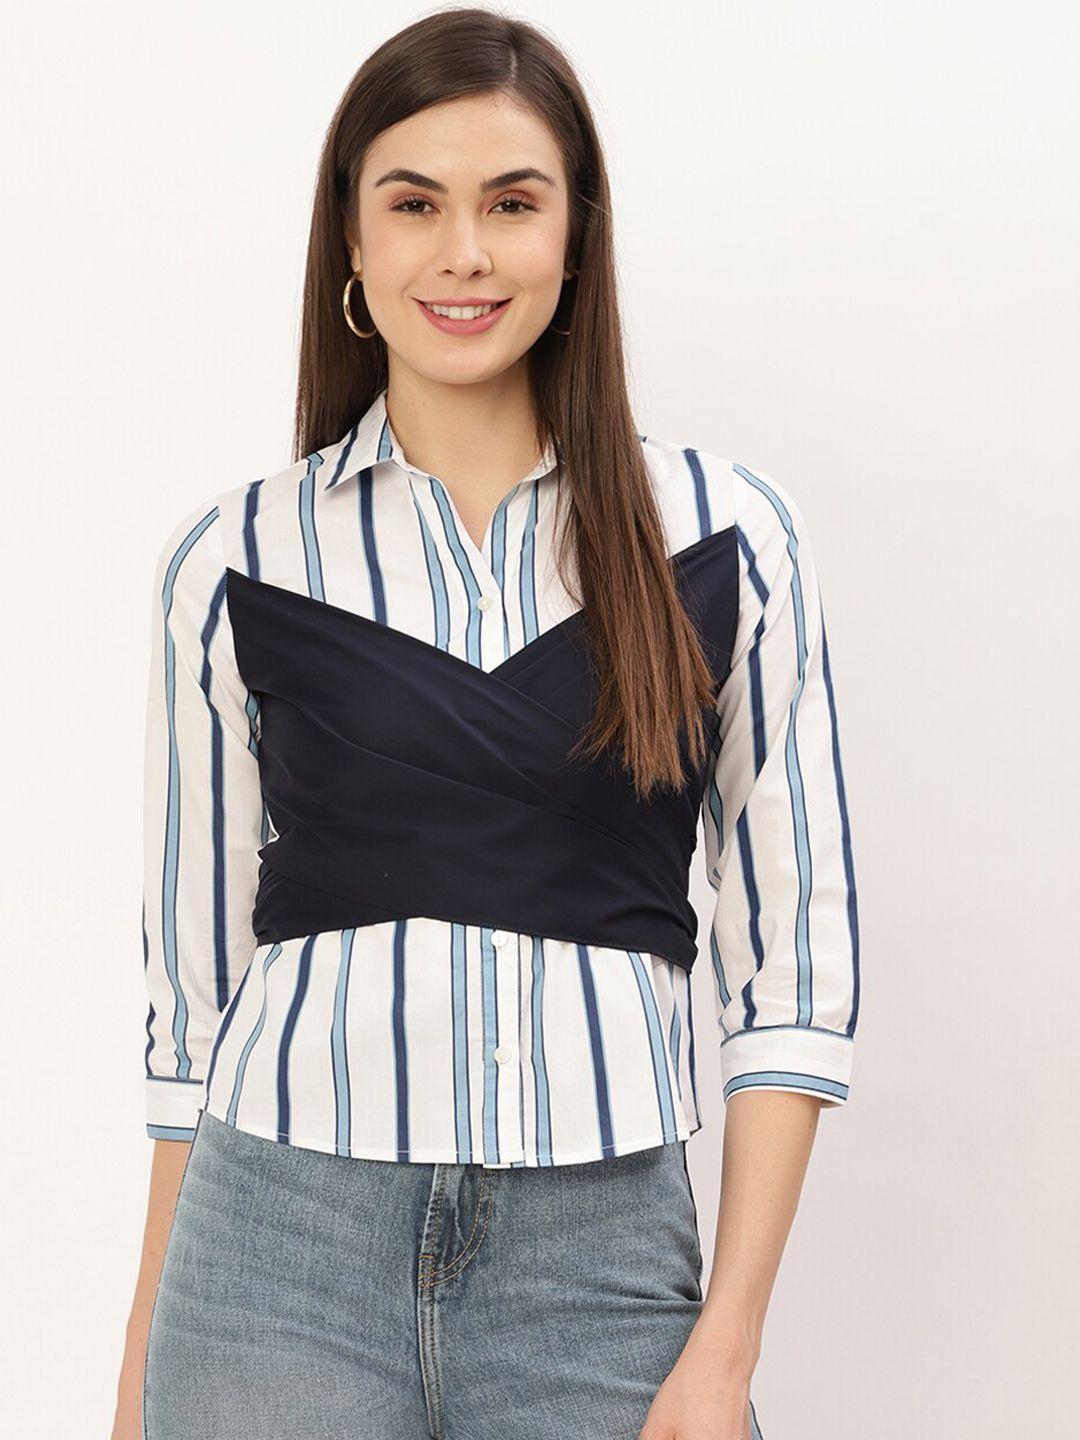 elle blue women white and blue  colourblocked shirt style top